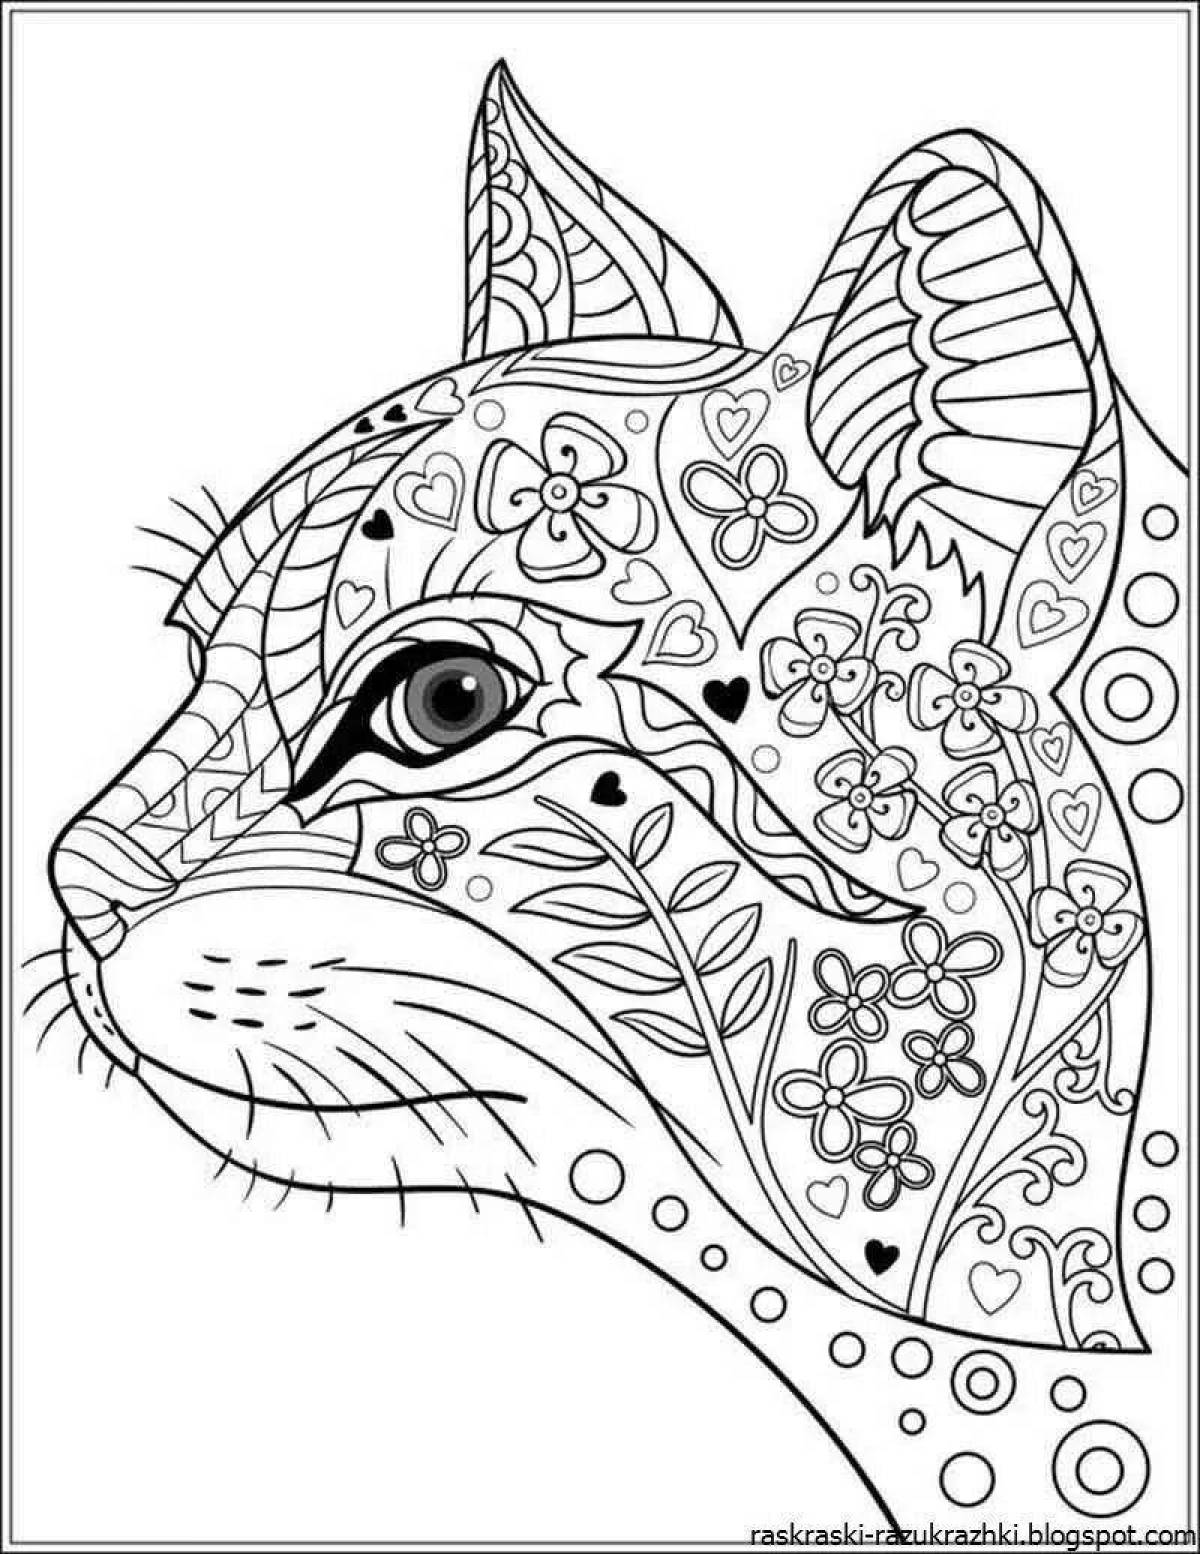 Fancy coloring for girls with 9 year old animals